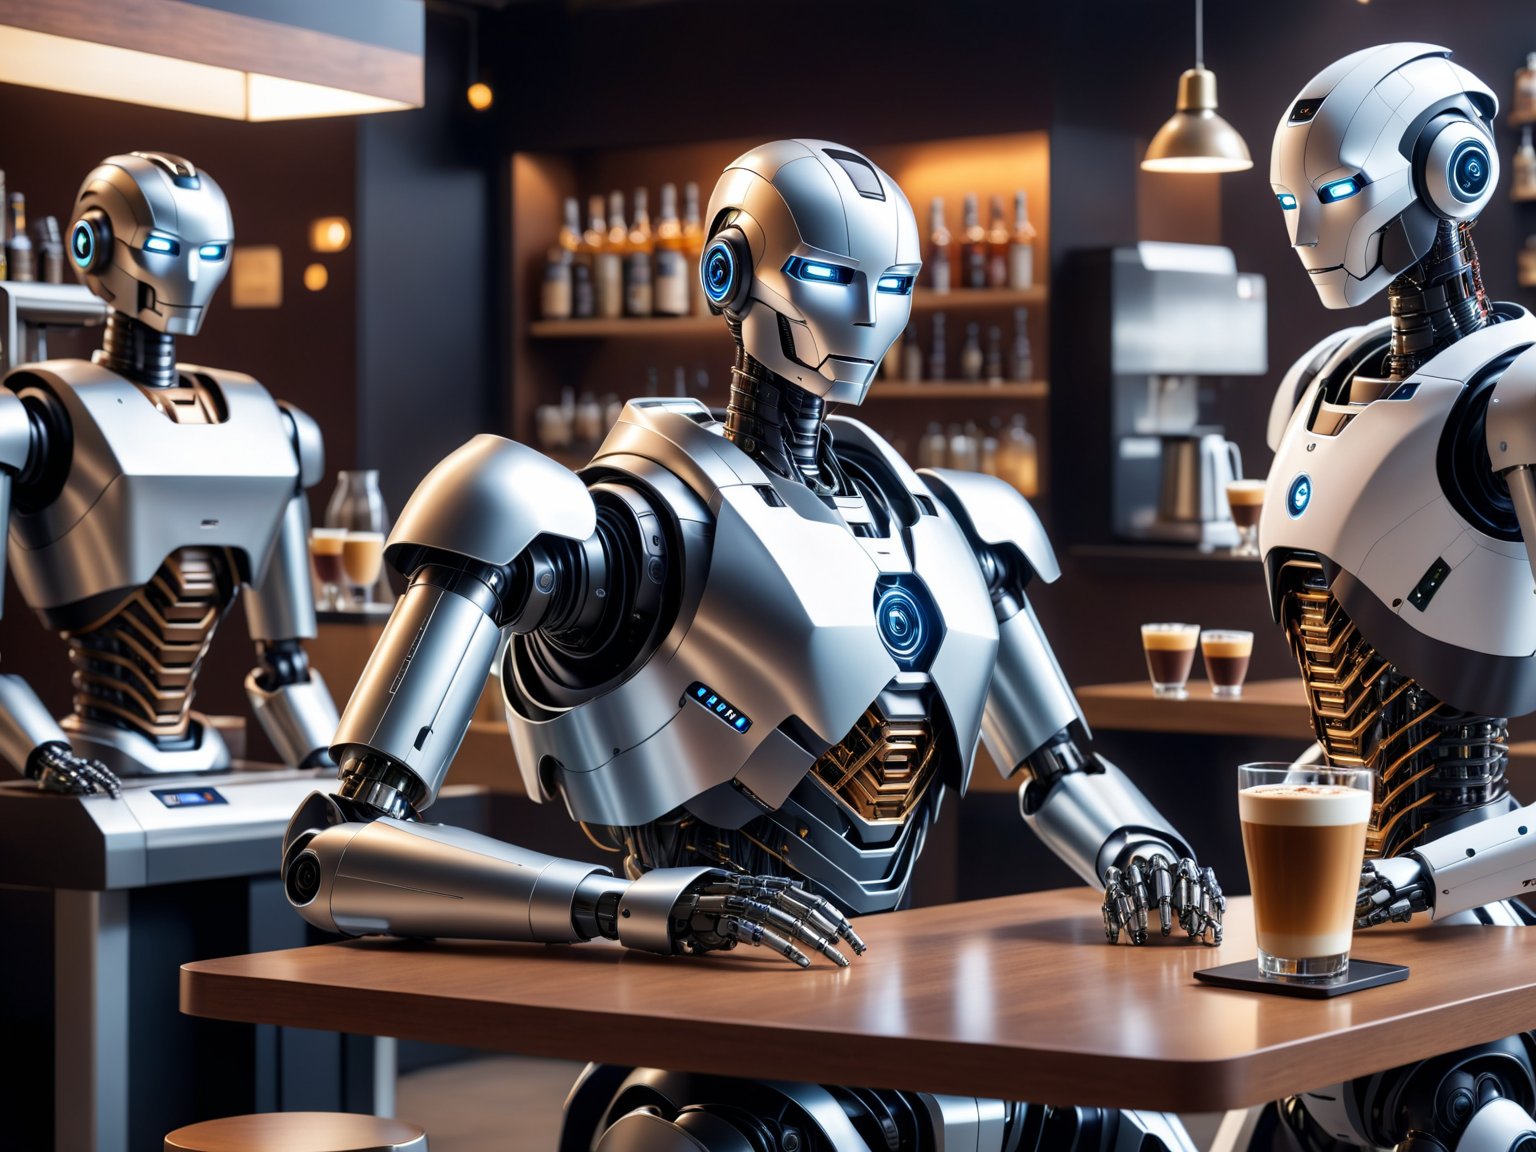 there is a robot that is sitting on a table next to a coffee machine, robot barkeep, robots drinking alcohol, the most advanced humanoid robot, robot with human face, friendly humanoid cyber robot, robot lurks in the background, biometric humanoid robot, friendly humanoid robot, humanoide robot, view is centered on the robot
